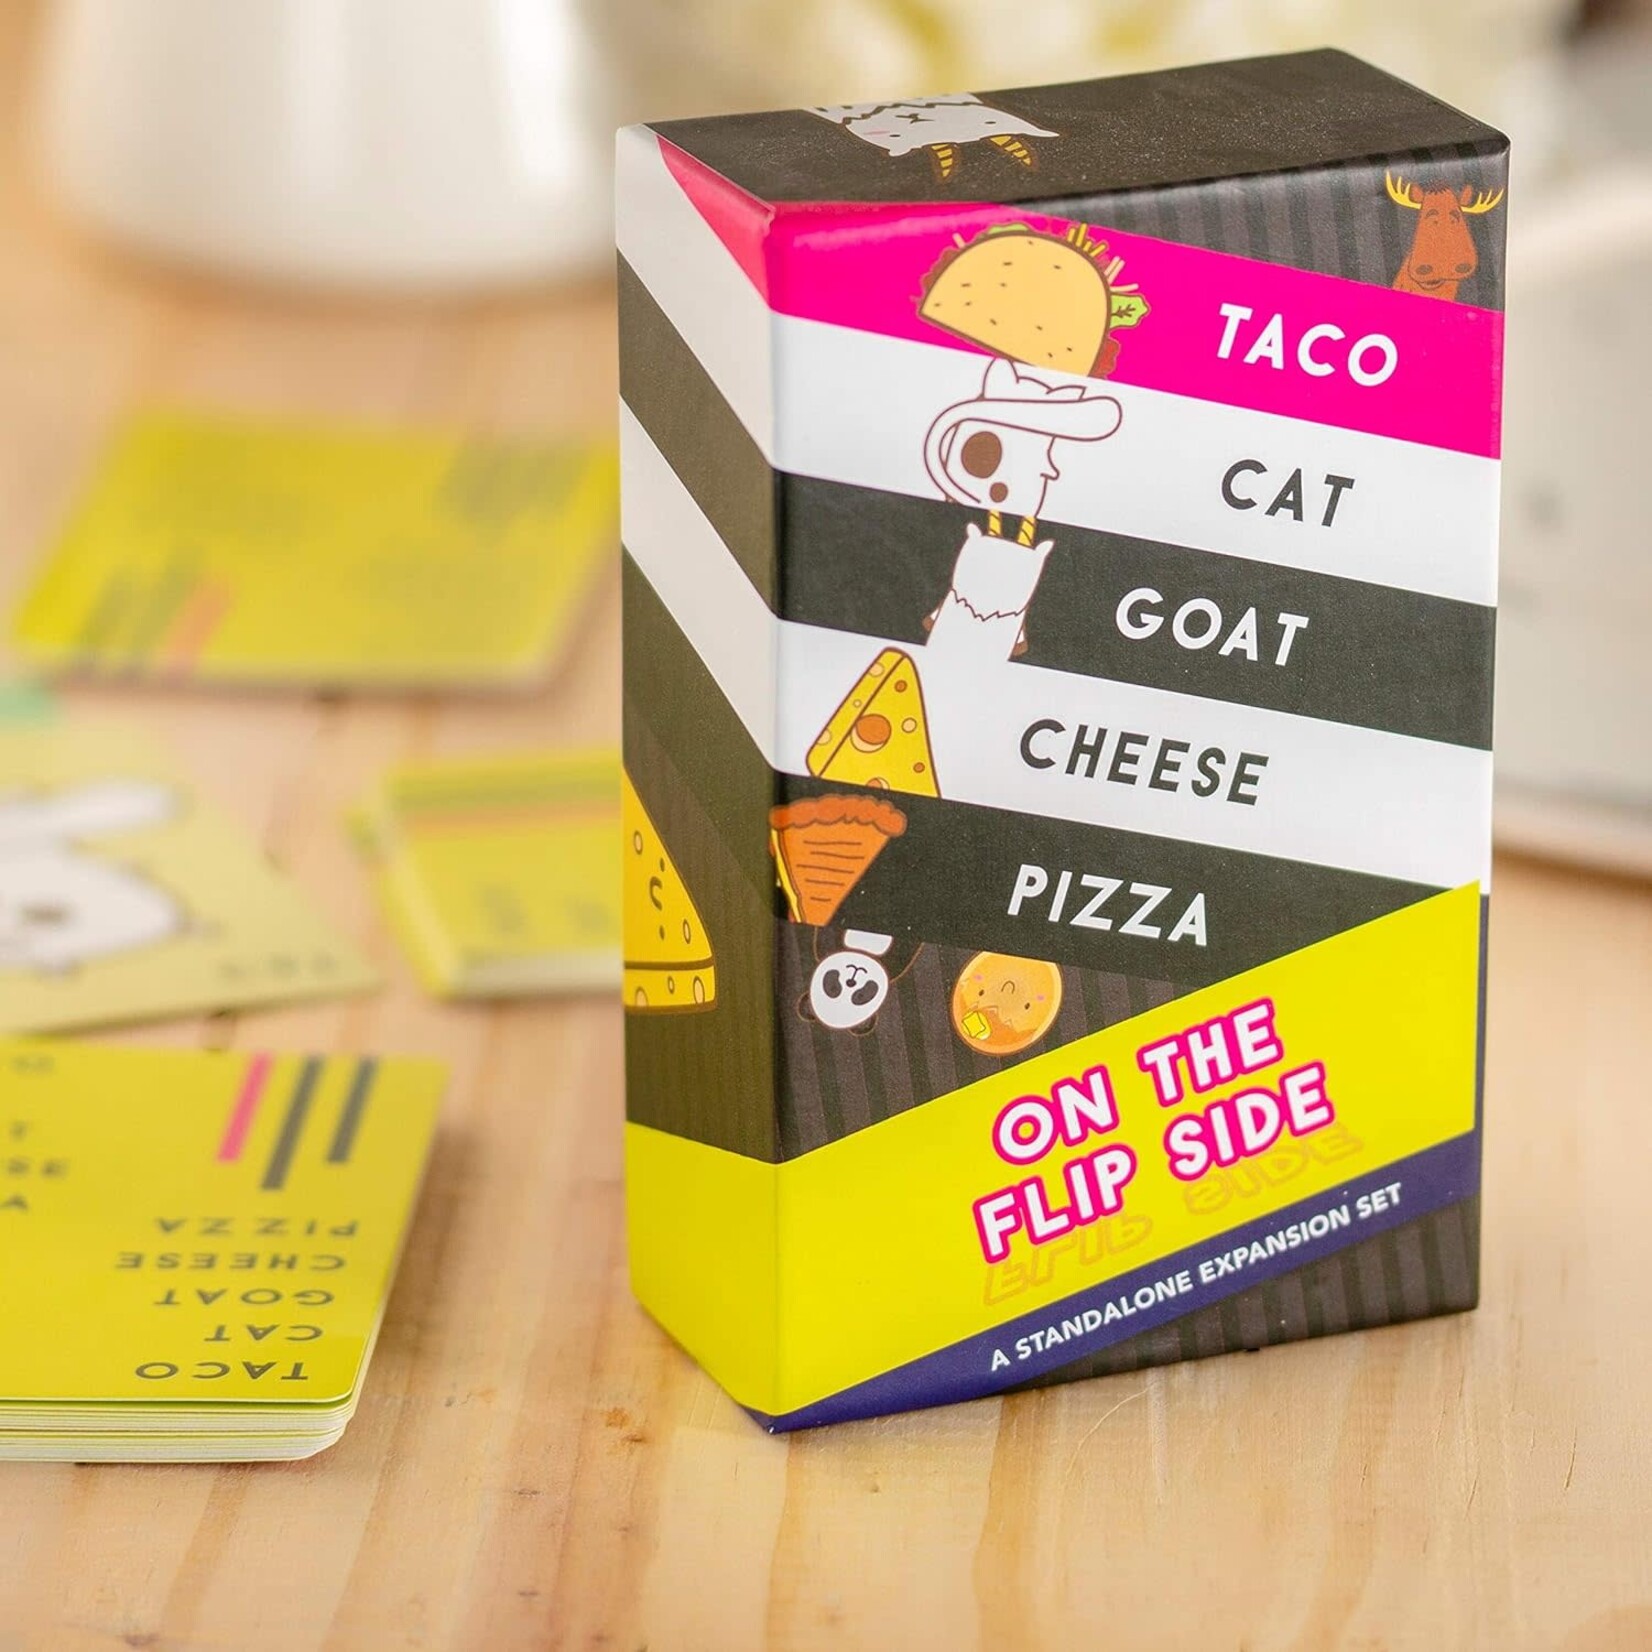 Dolphin Hat Games Taco Cat Goat Cheese Pizza: On The Flip Side (Standalone or Expansion)